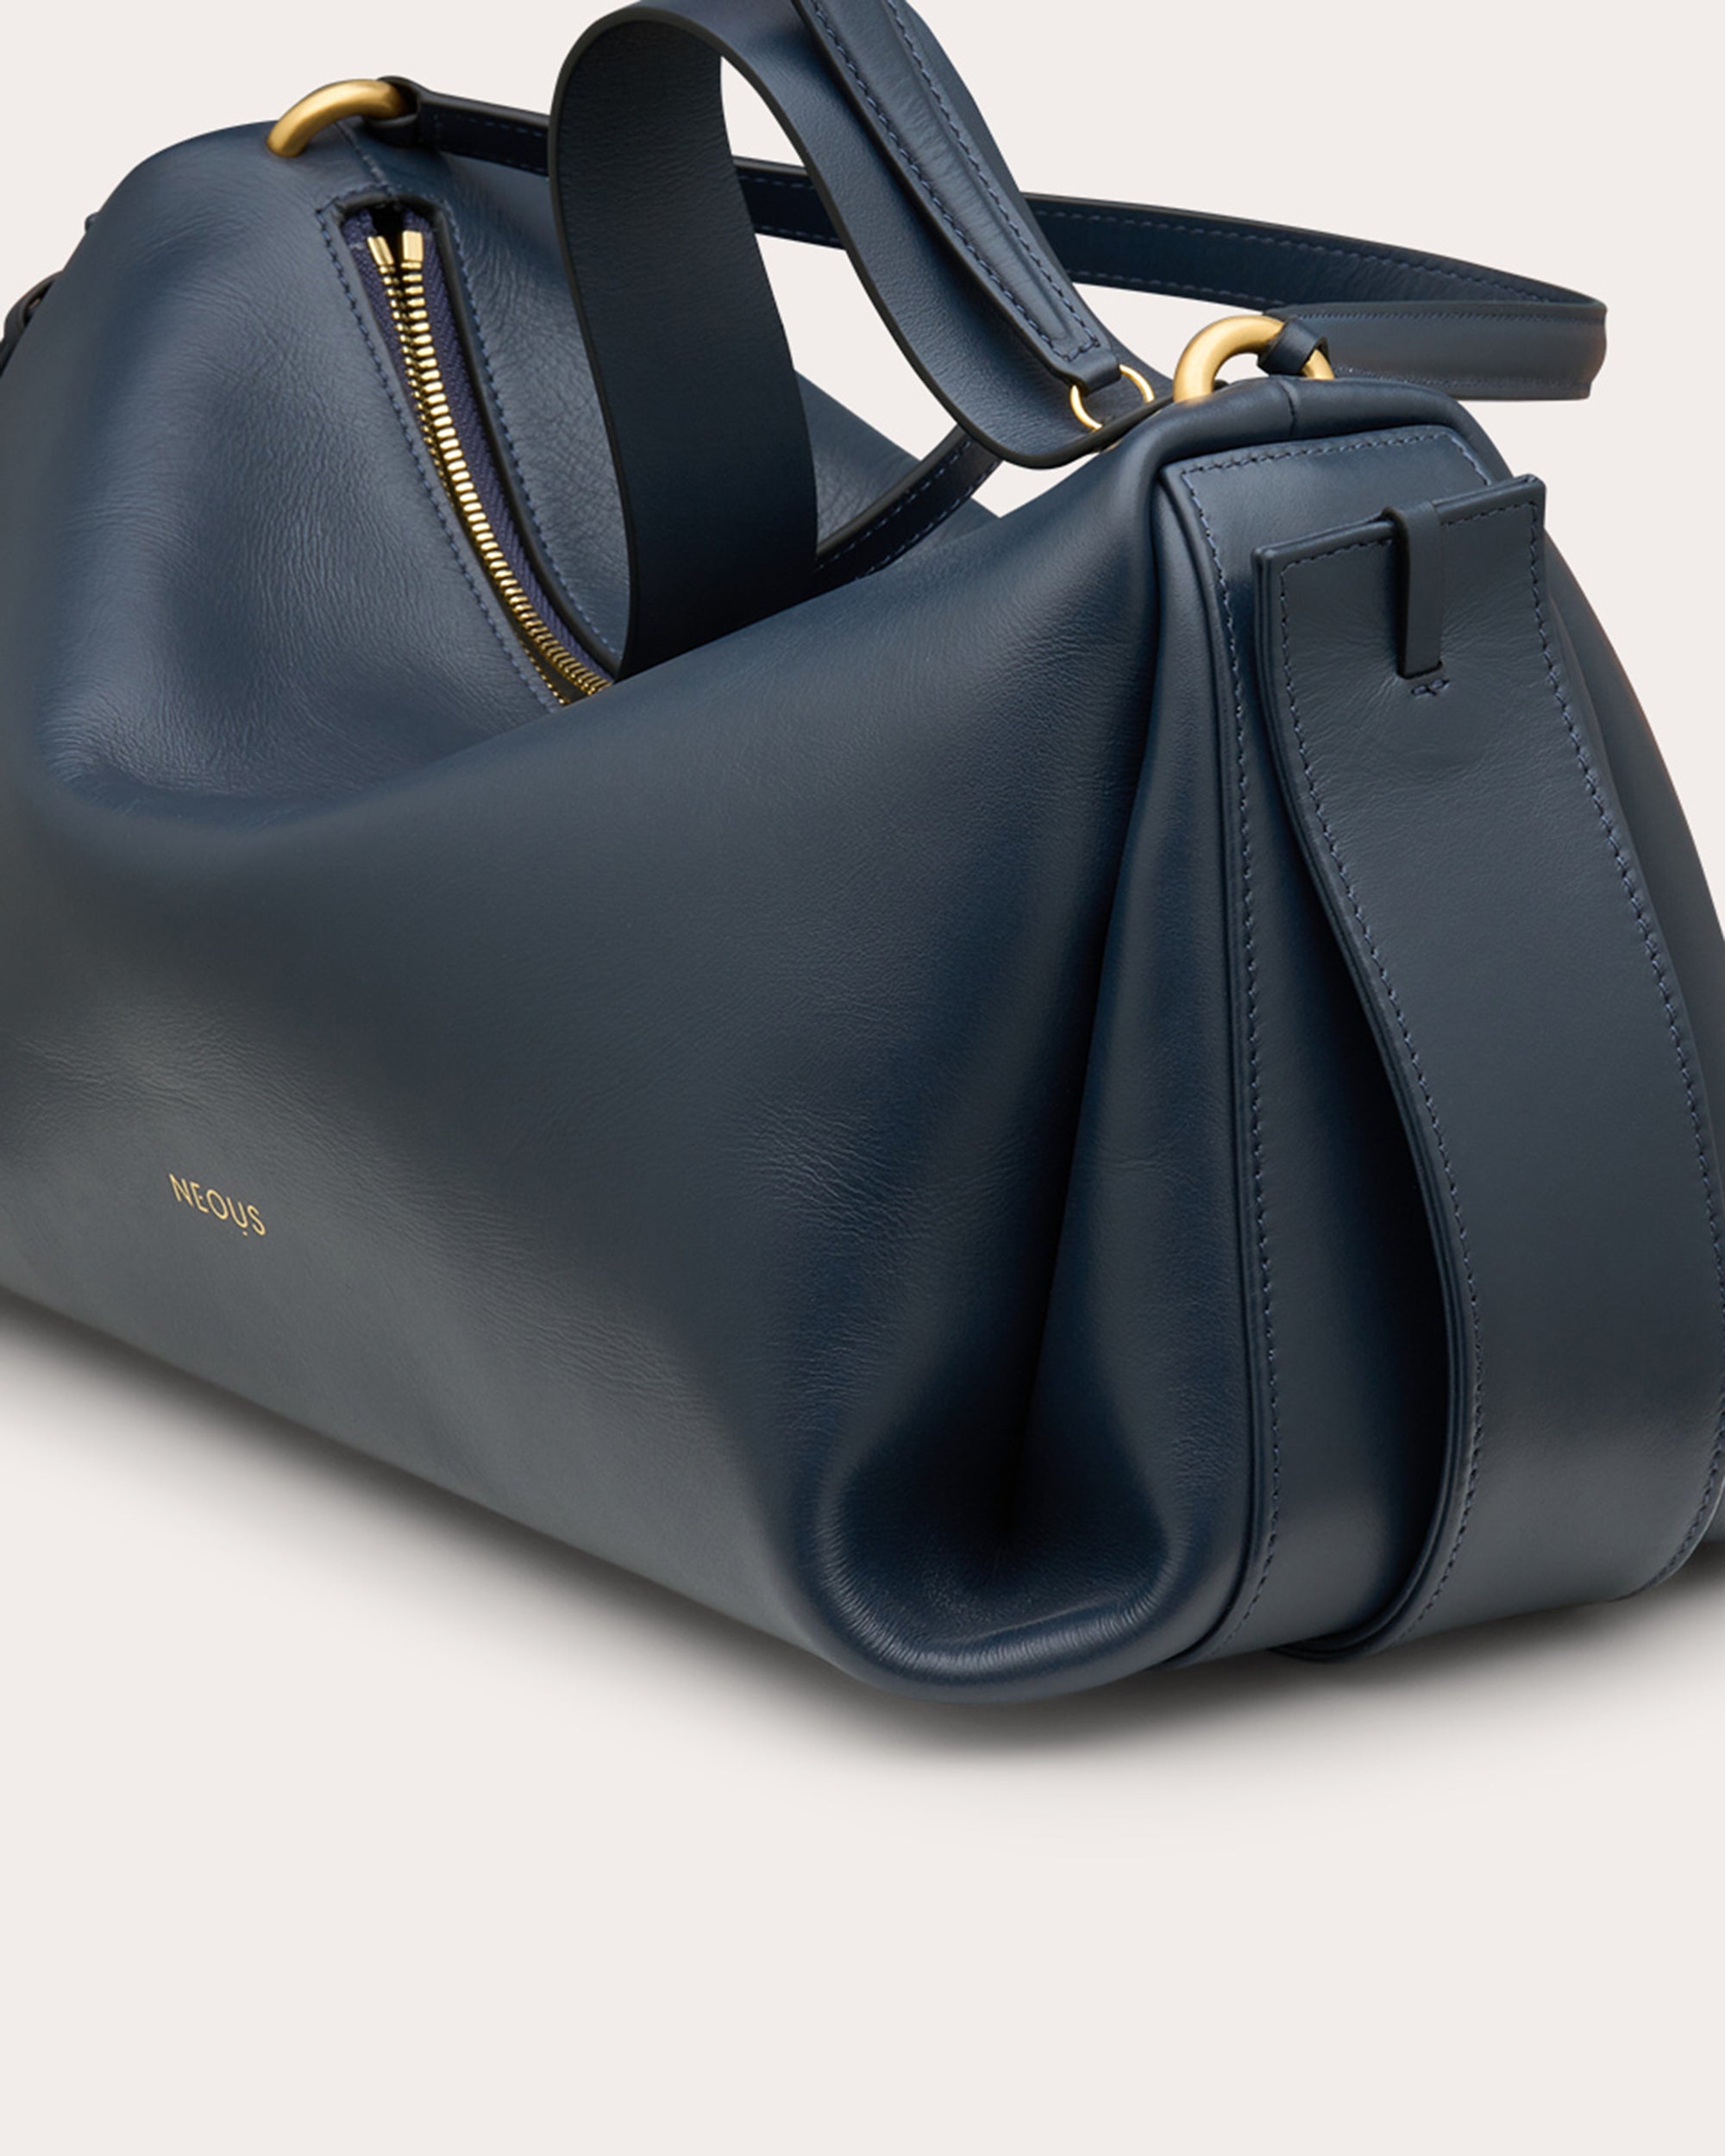 NEOUS Women's Corvus Saddle Bag in Navy | Suede/Leather